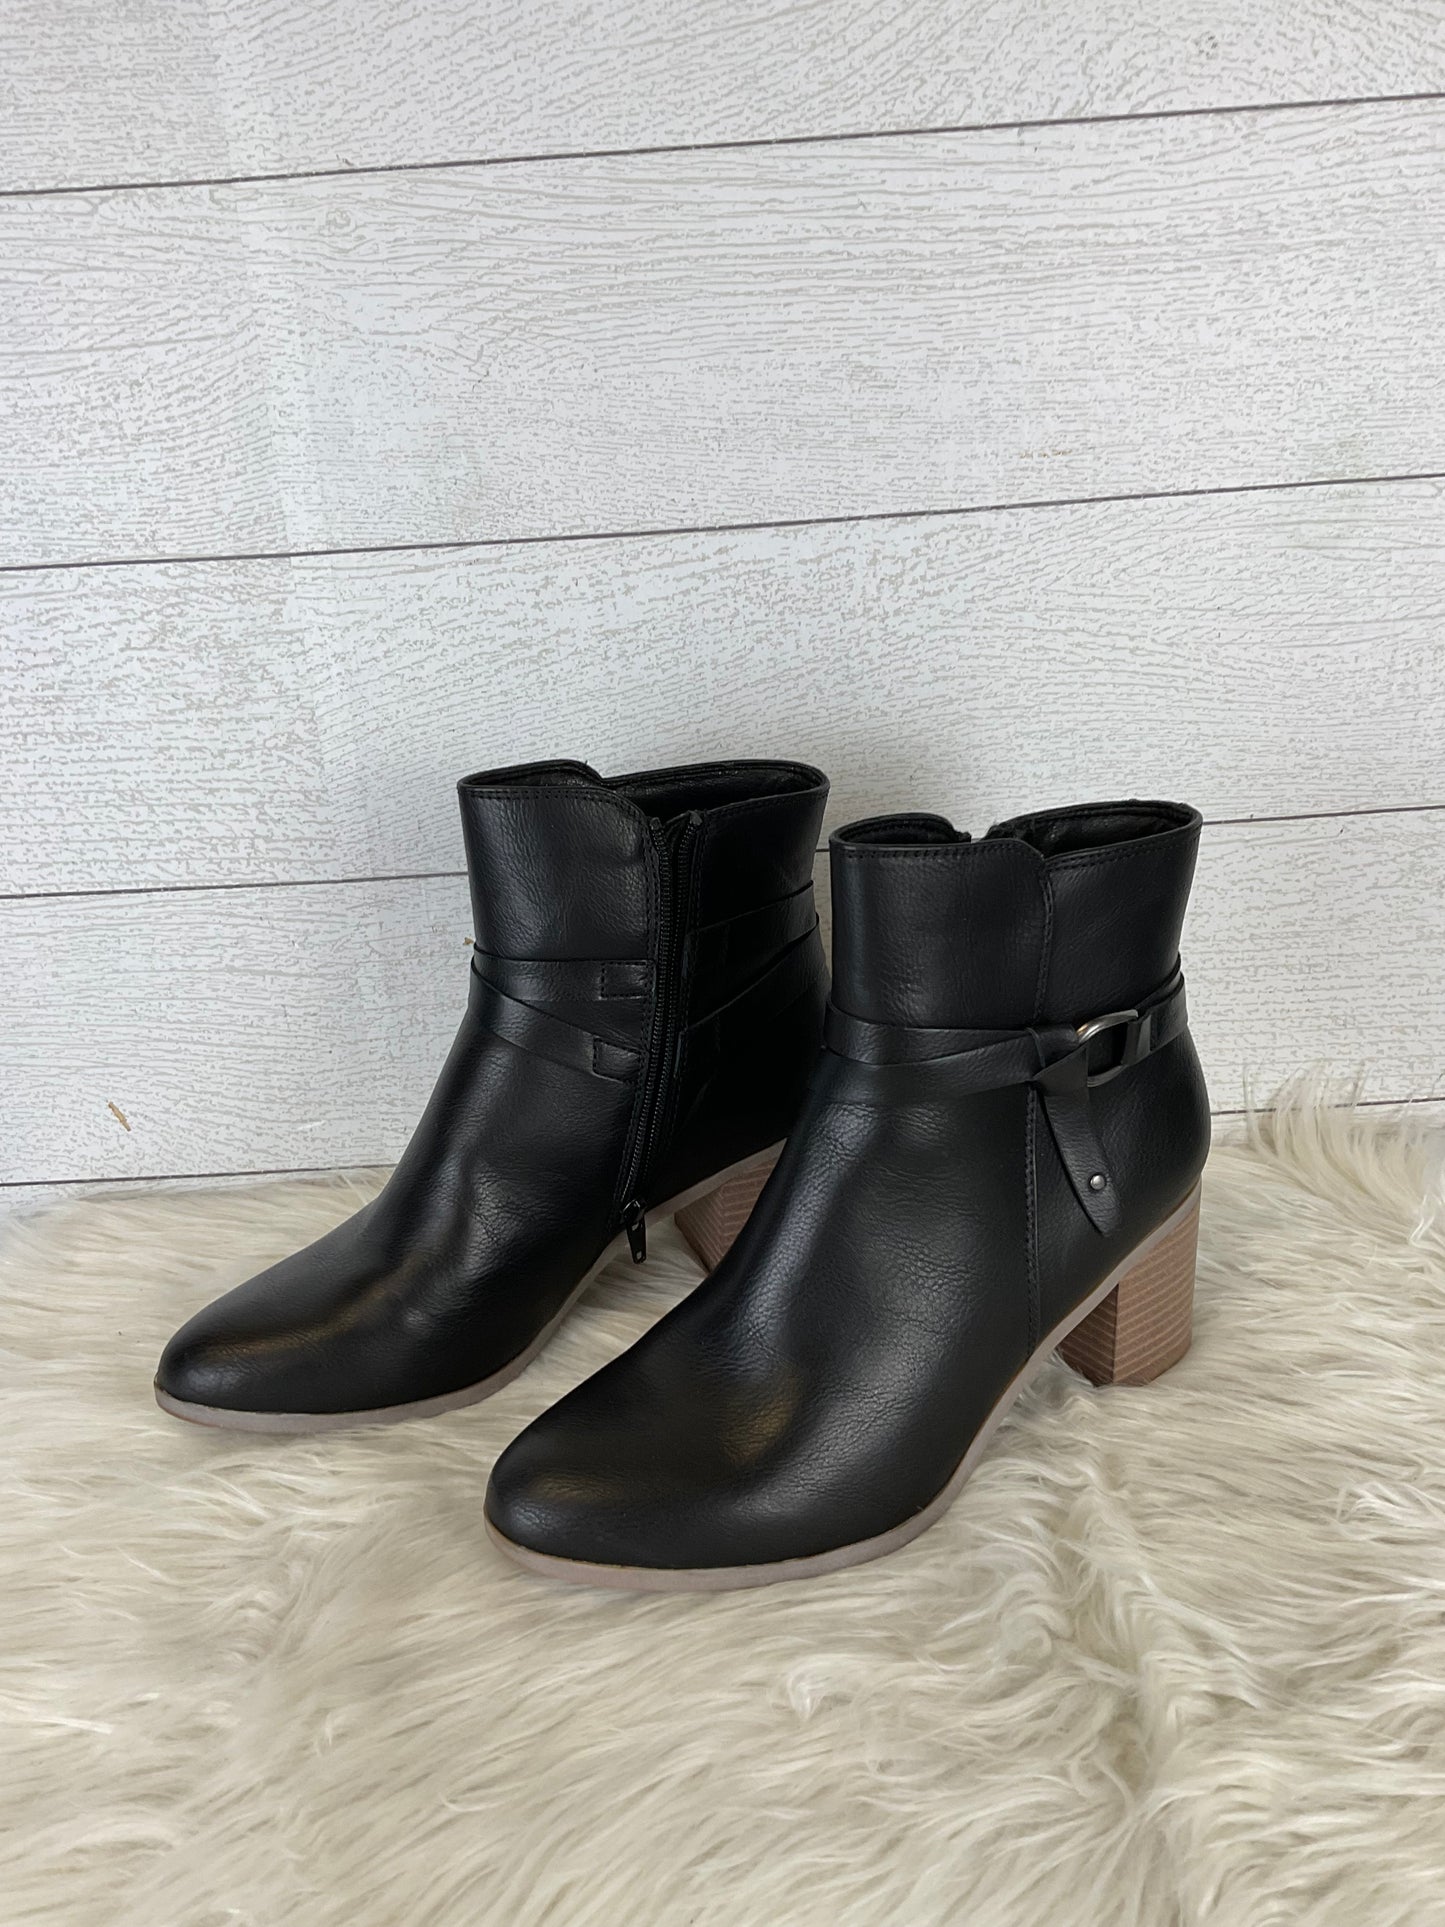 Boots Ankle Heels By Frye And Co  Size: 10